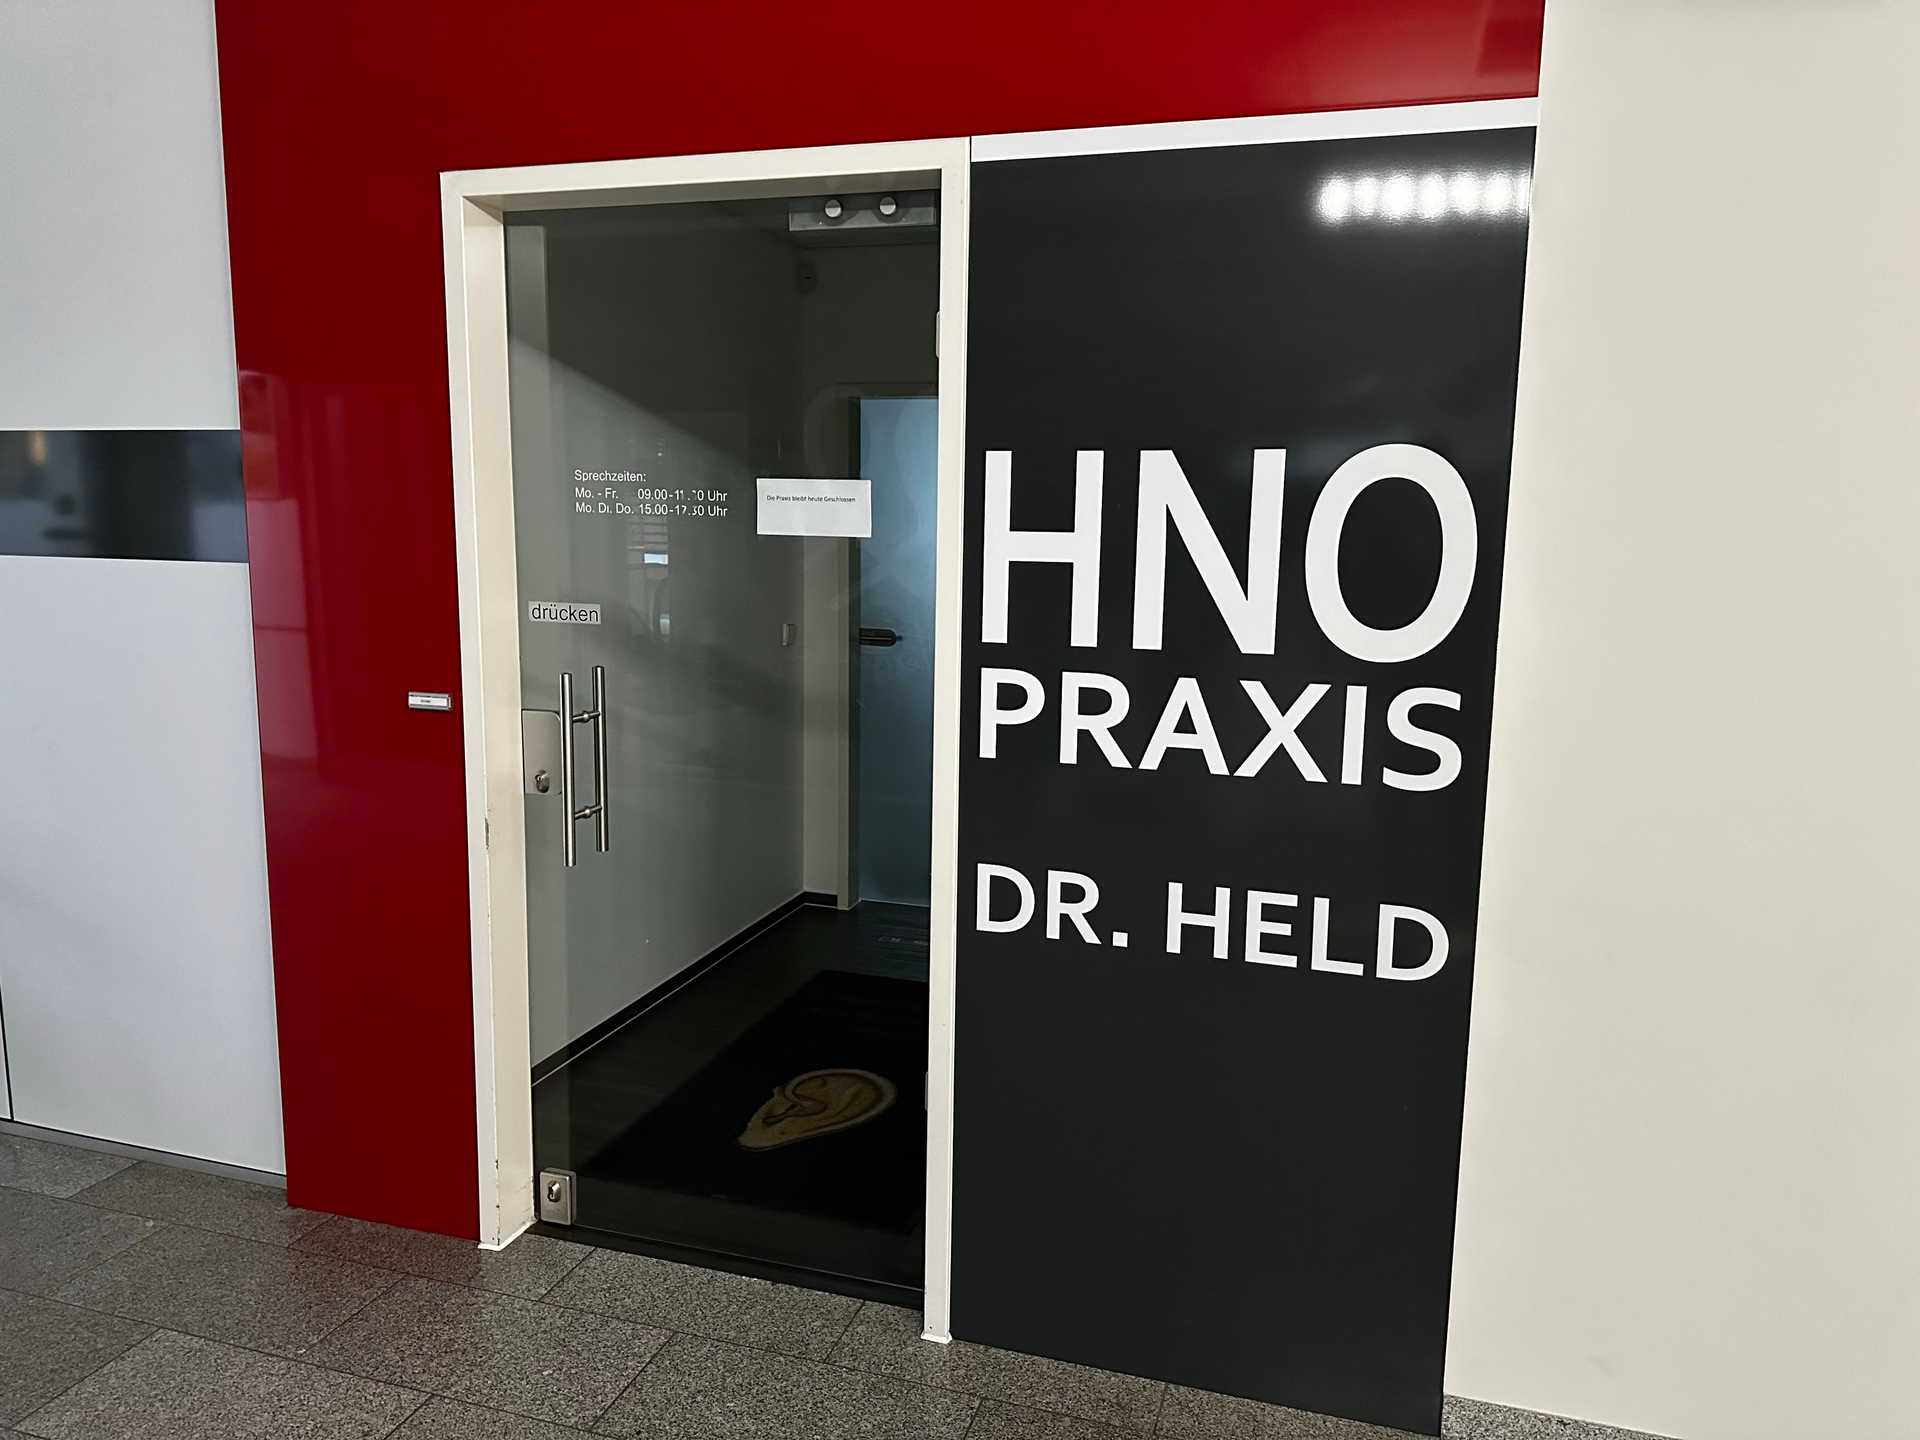 HNO Praxis Held